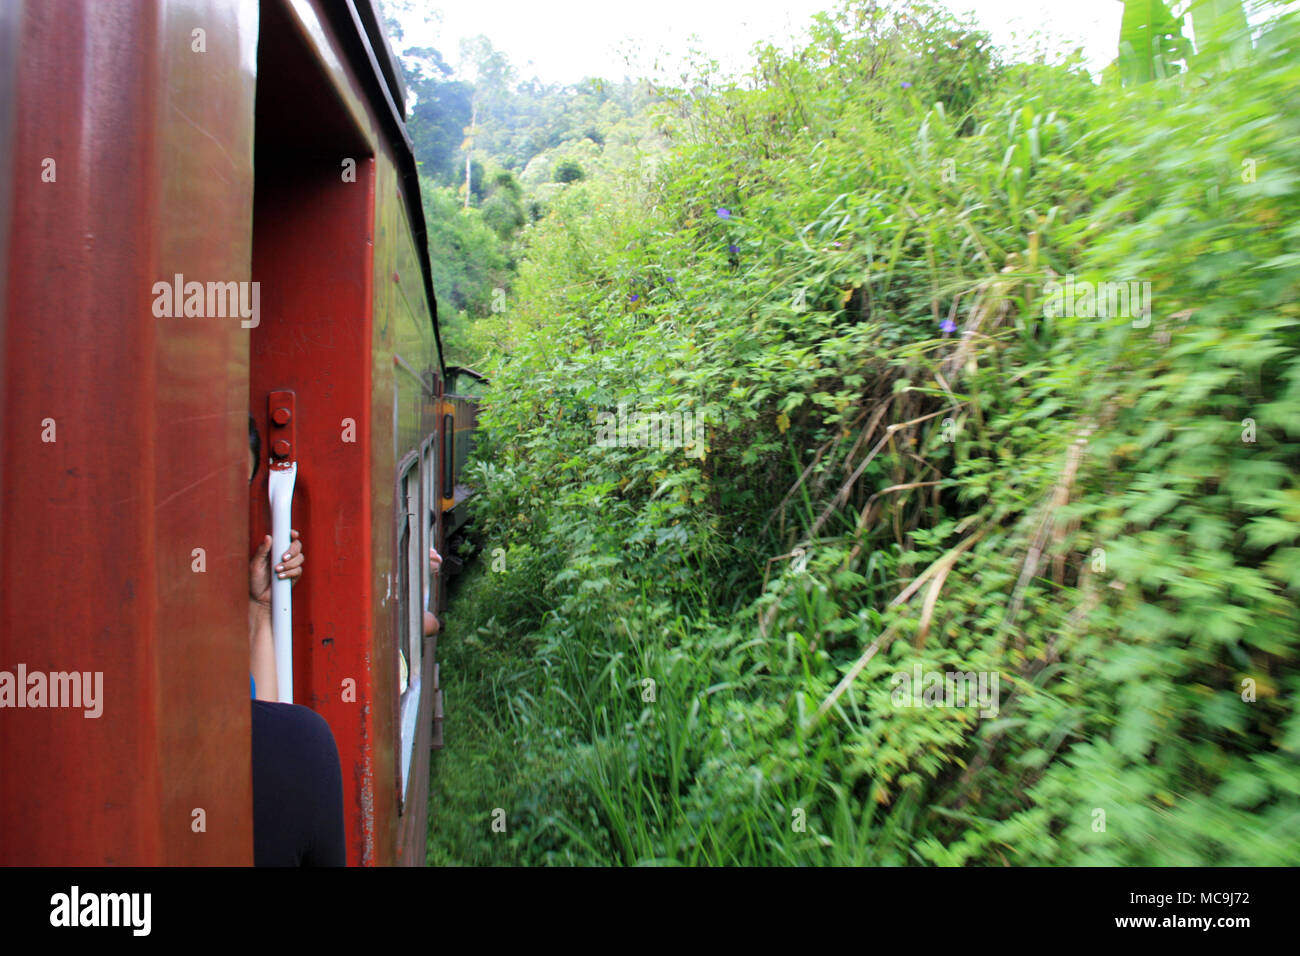 Taking a scenic train ride from Ella to Kandy, passing some tropical vegetation Stock Photo